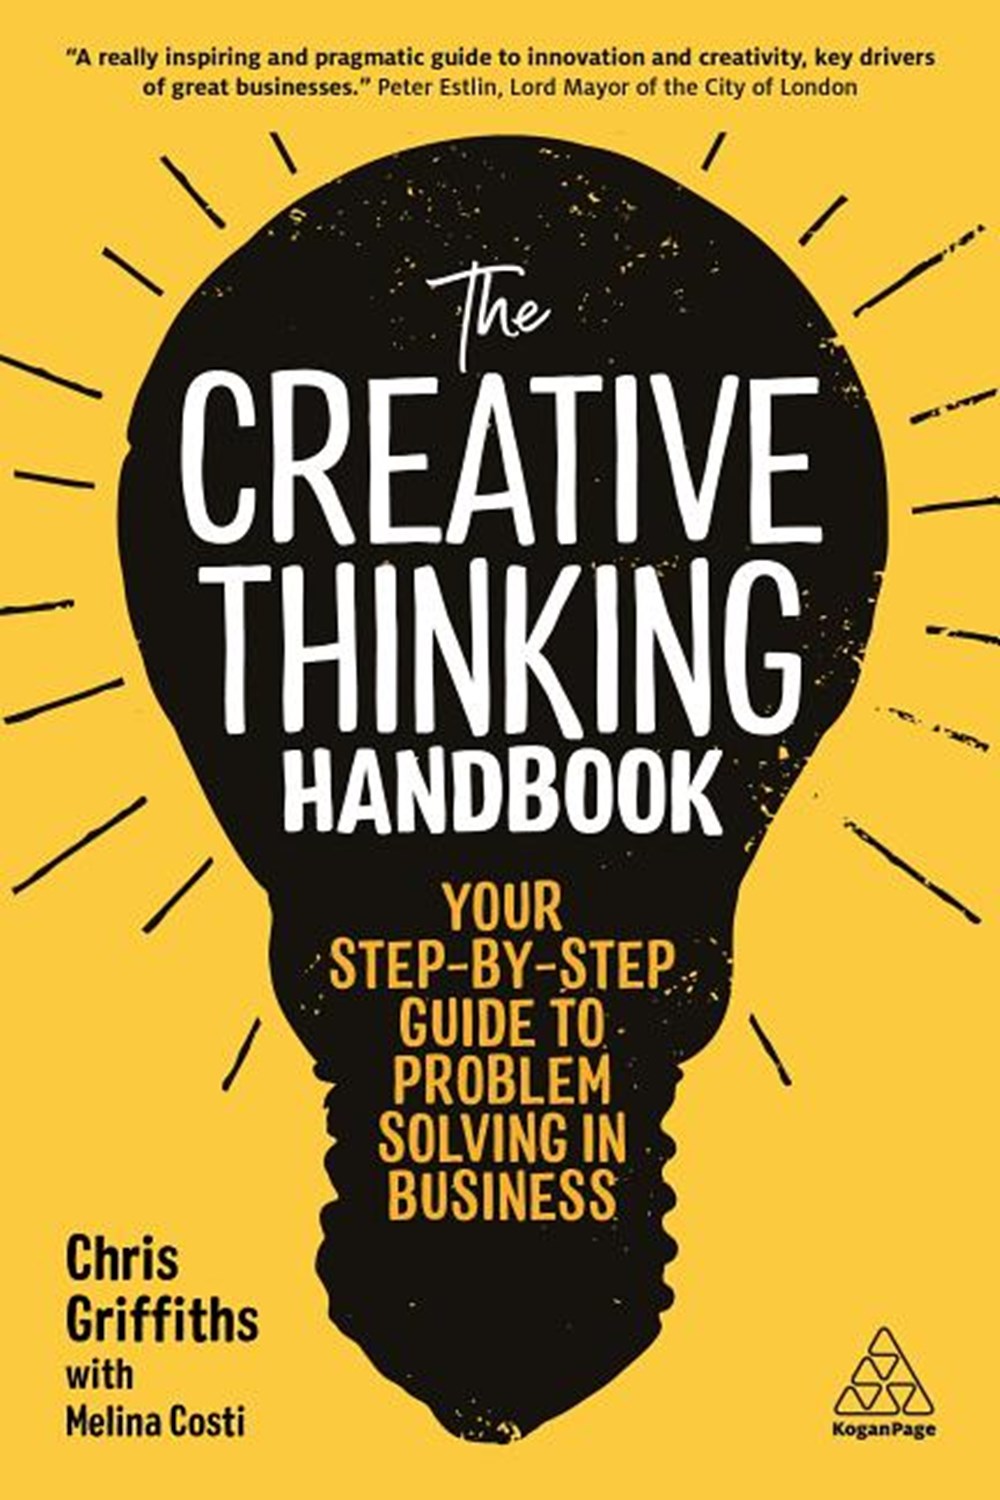 article about creative thinking and problem solving